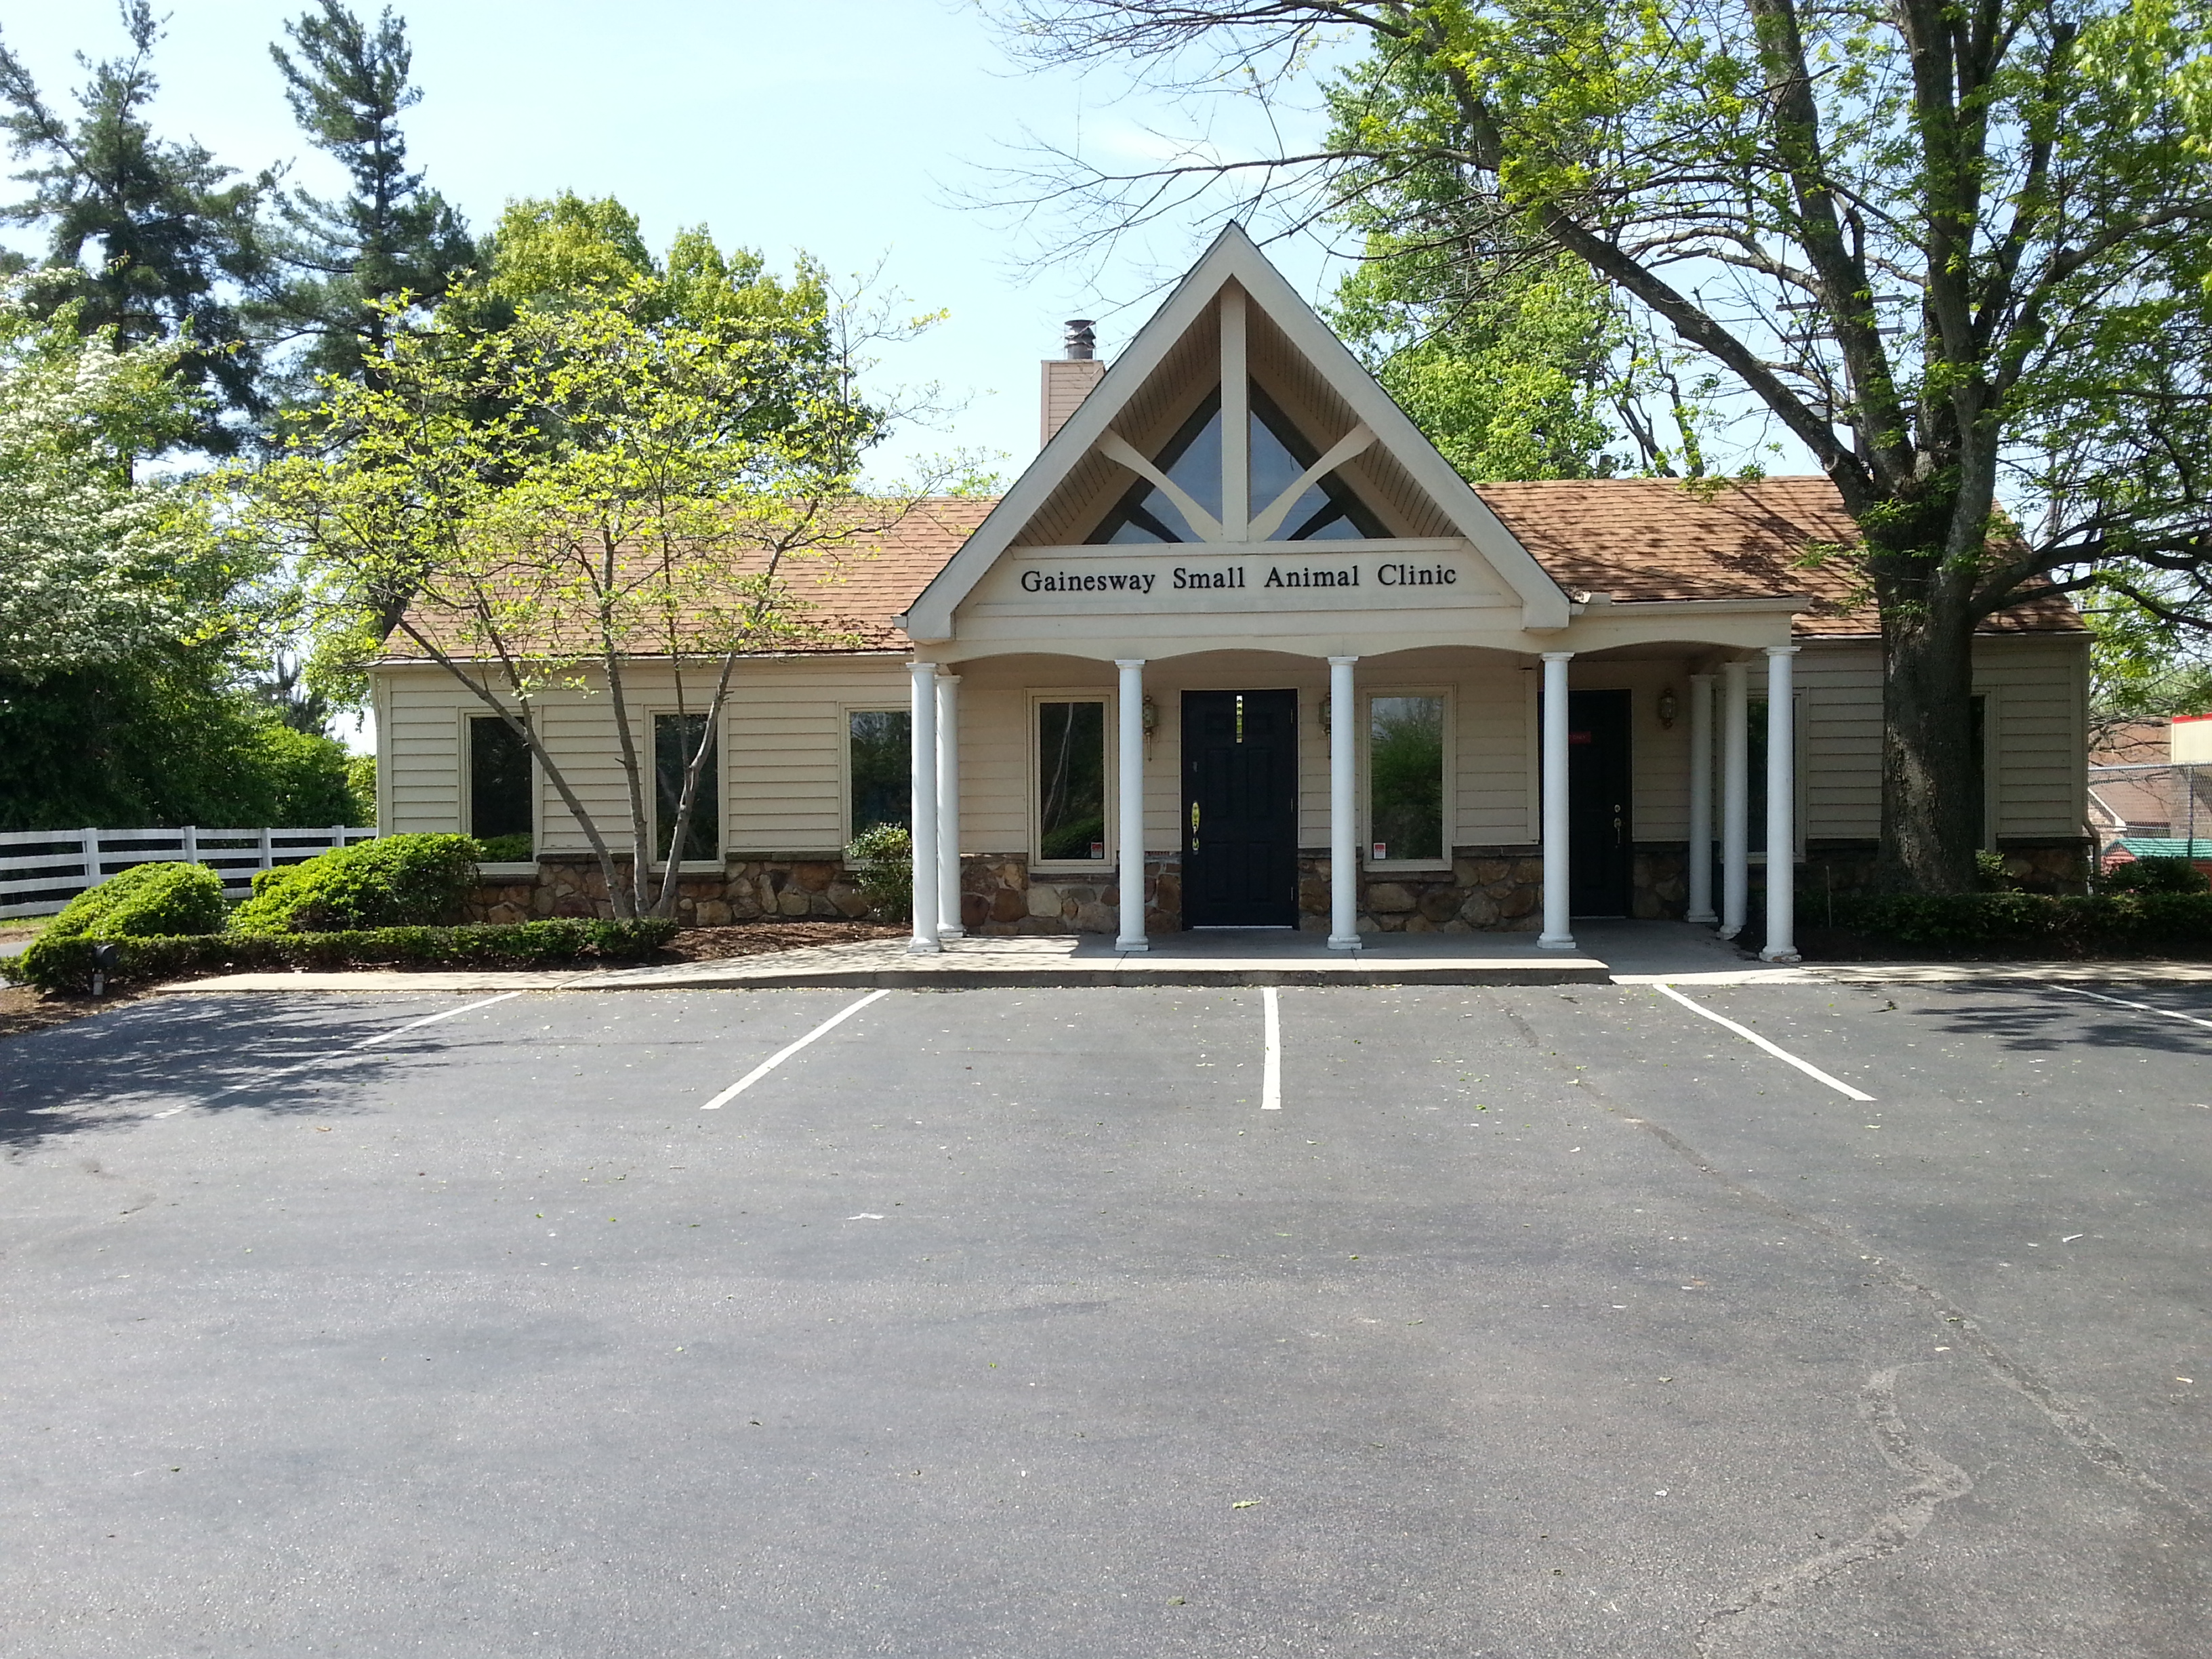 Gainesway Small Animal Clinic - Veterinarian In Lexington, KY USA :: Home  Gainesway Small Animal Clinic - Veterinarian in Lexington, KY US